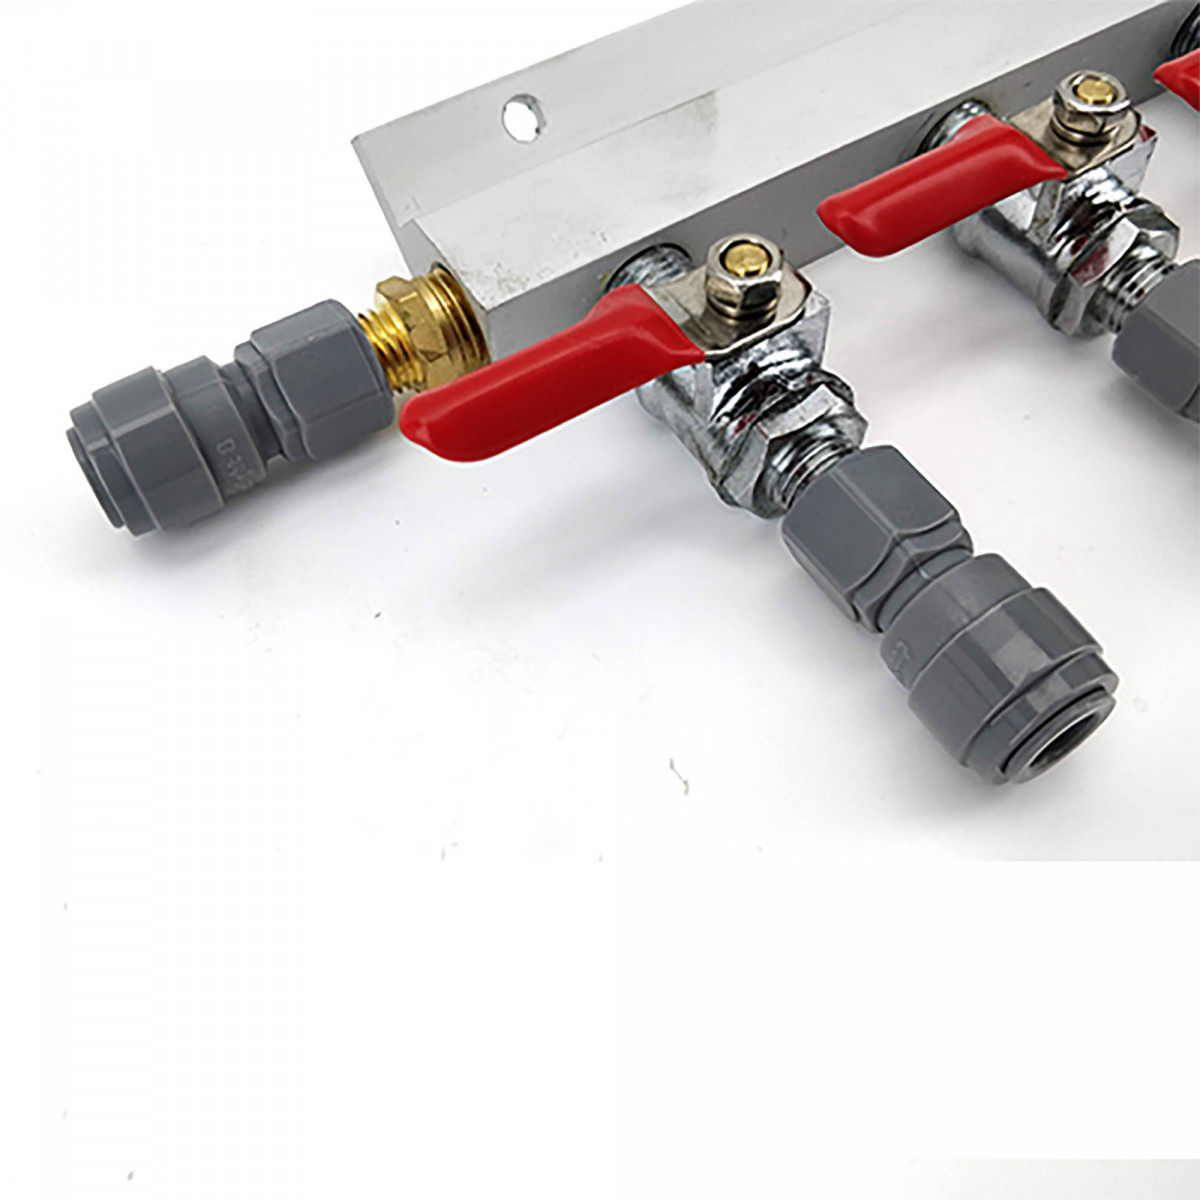 Duotight  two-way manifold gas line splitter 1/4" MFL with 2 outputs to 7/16 MFL